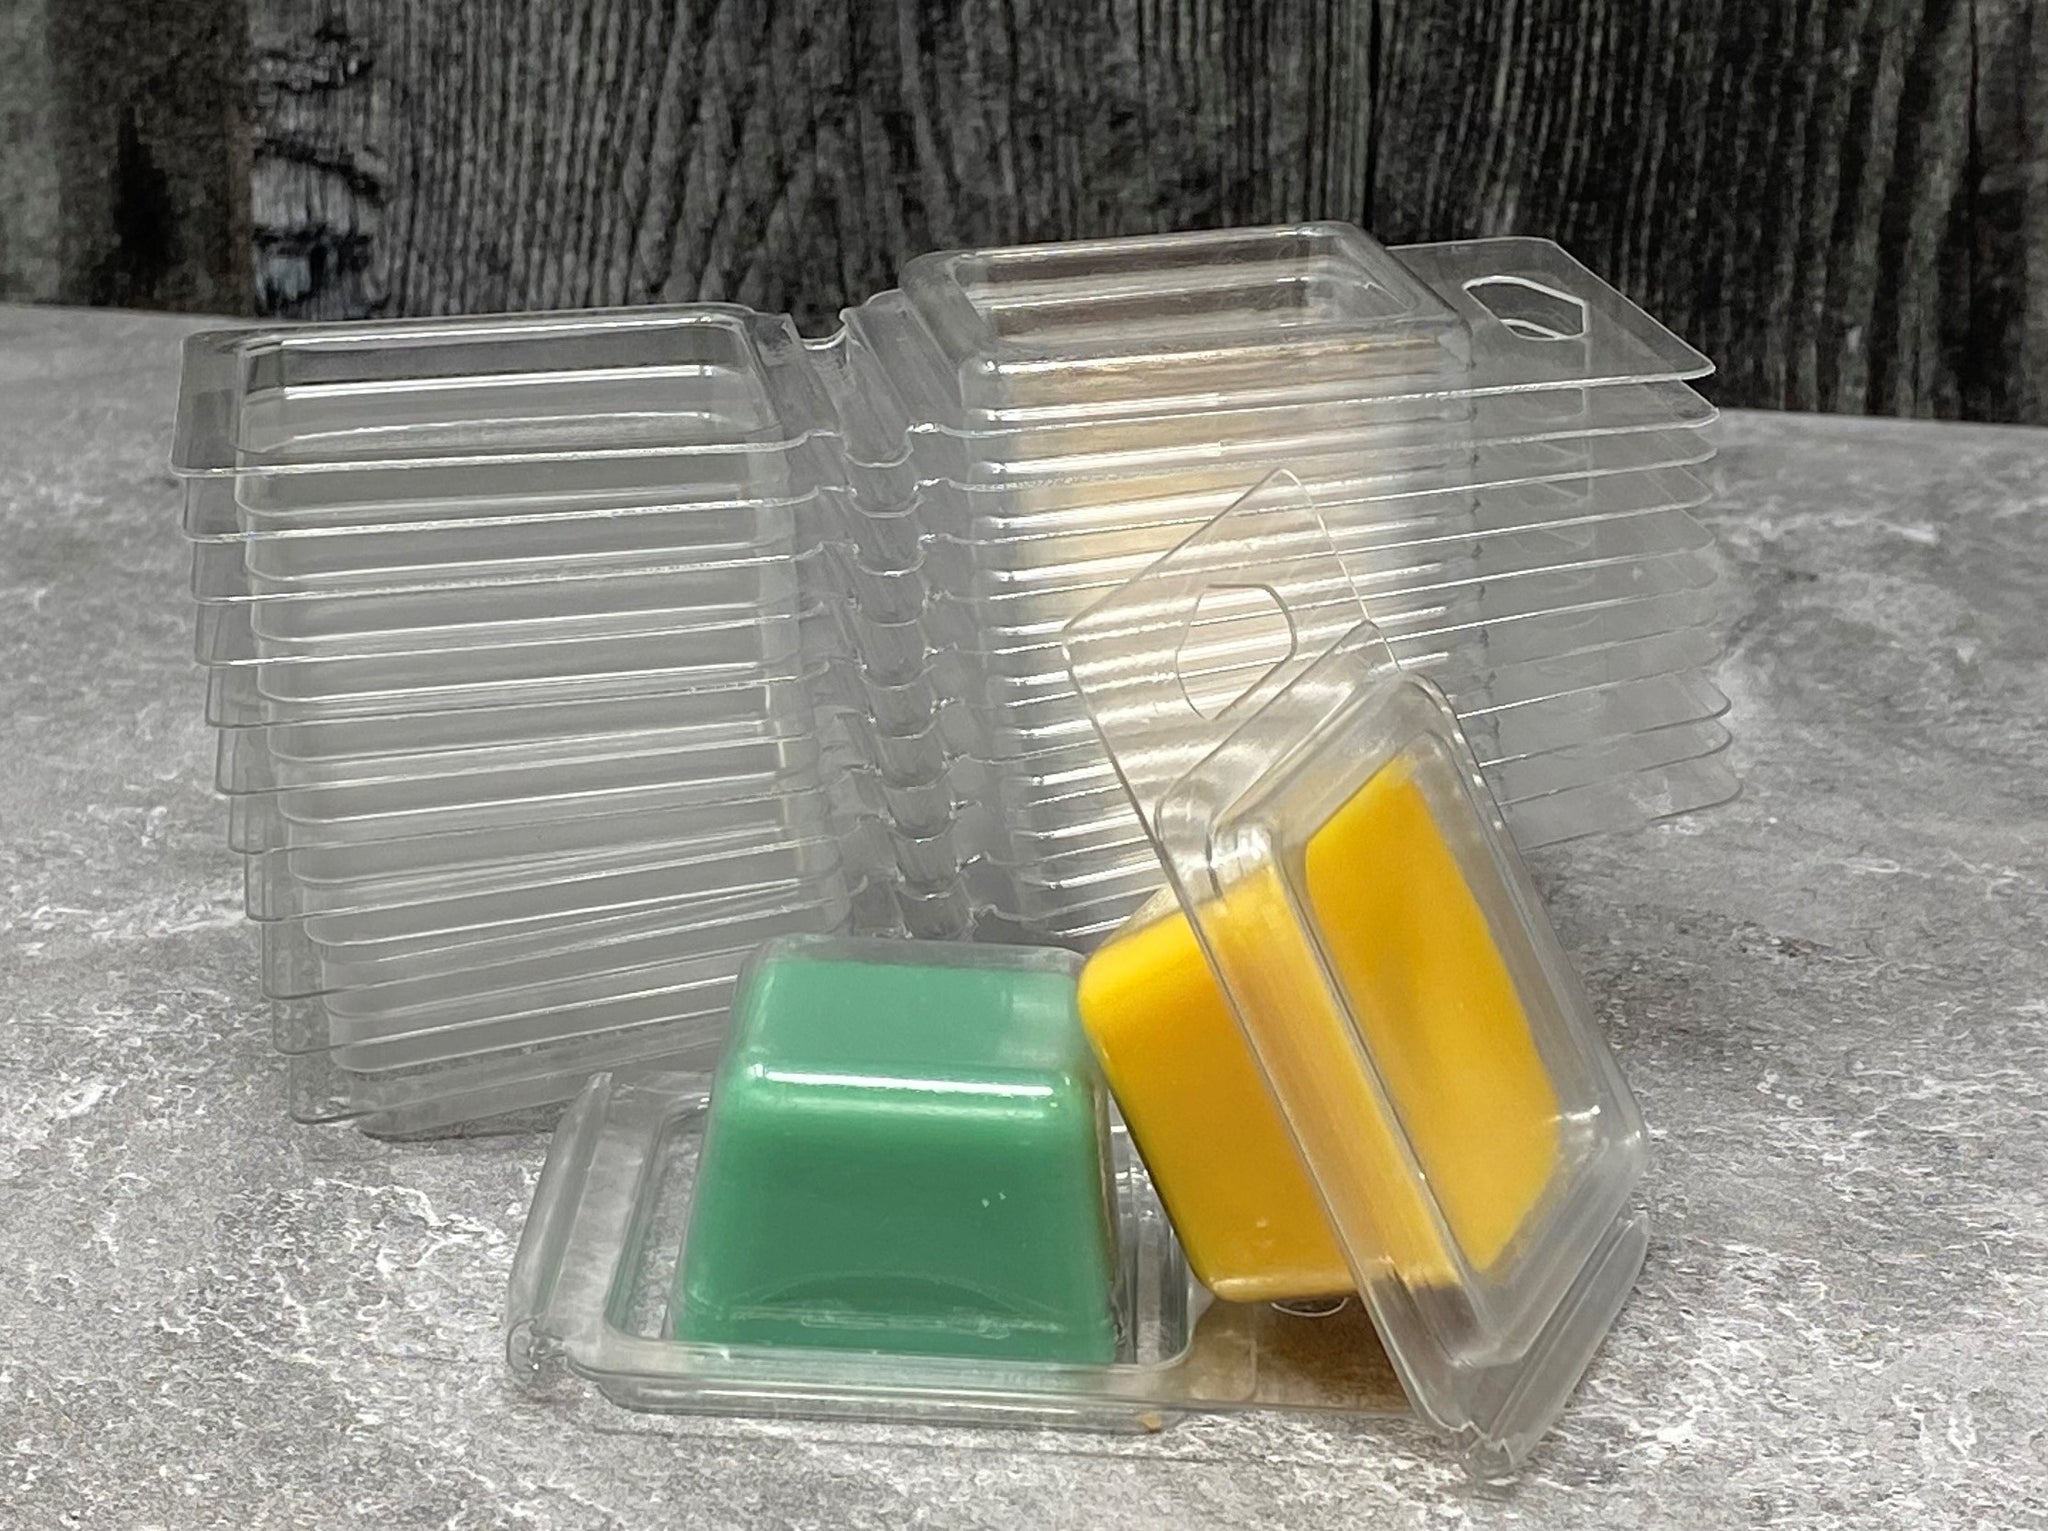 How to Make Wax Melts in a Clamshell Mold